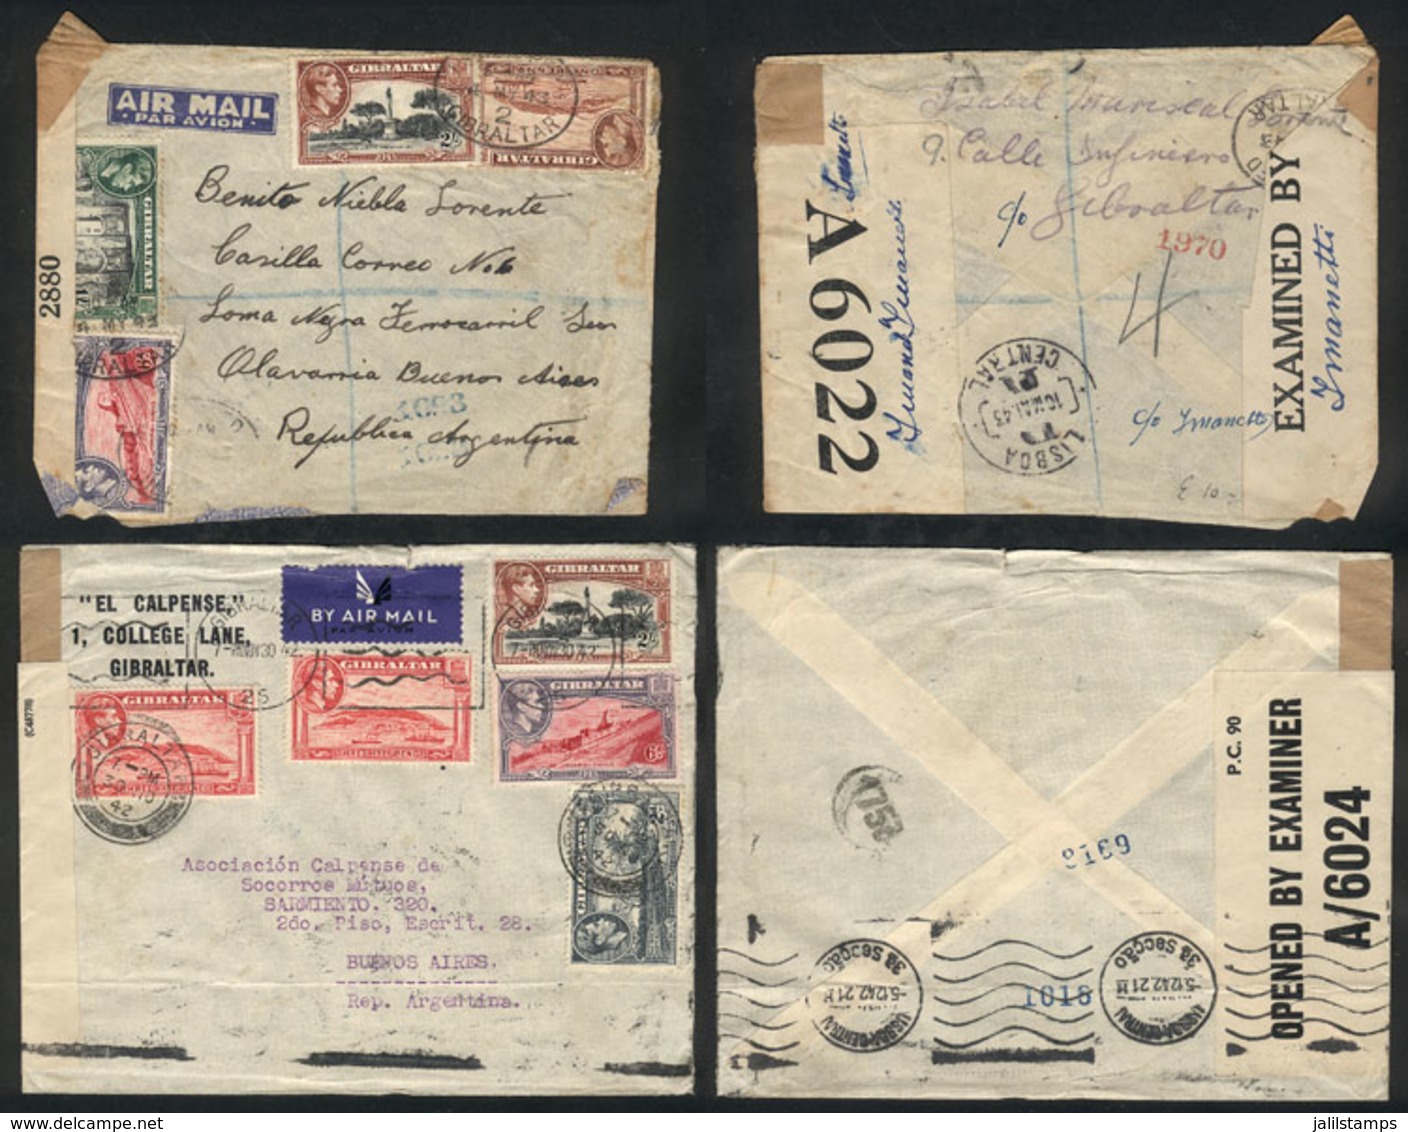 1311 GIBRALTAR: 2 Covers Sent To Argentina In 1942/3 With Attractive Postages And Censor Marks, With Minor Faults But Ve - Gibraltar